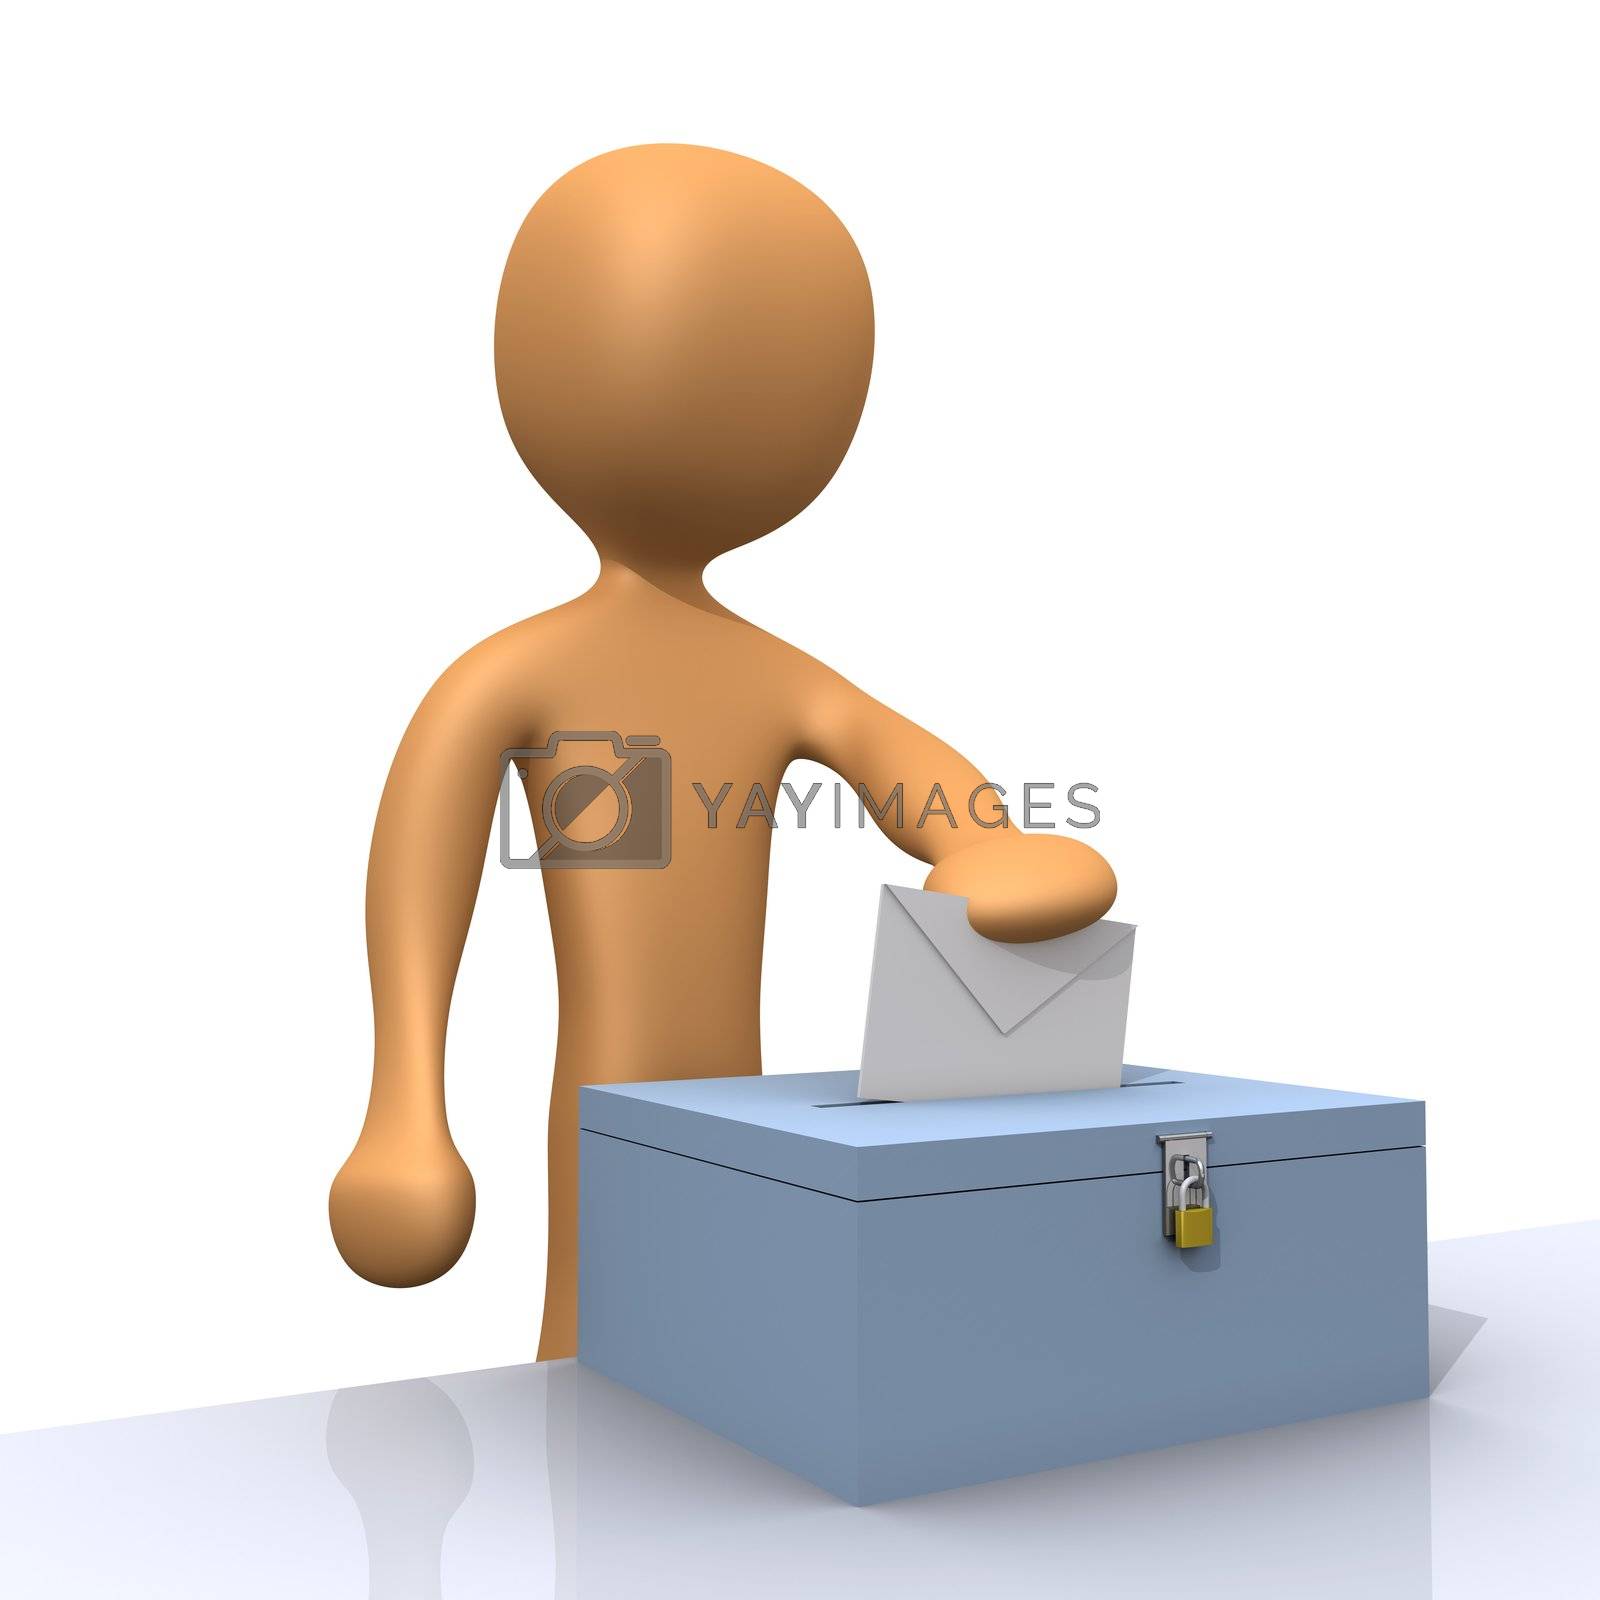 Royalty free image of Voting by 3pod